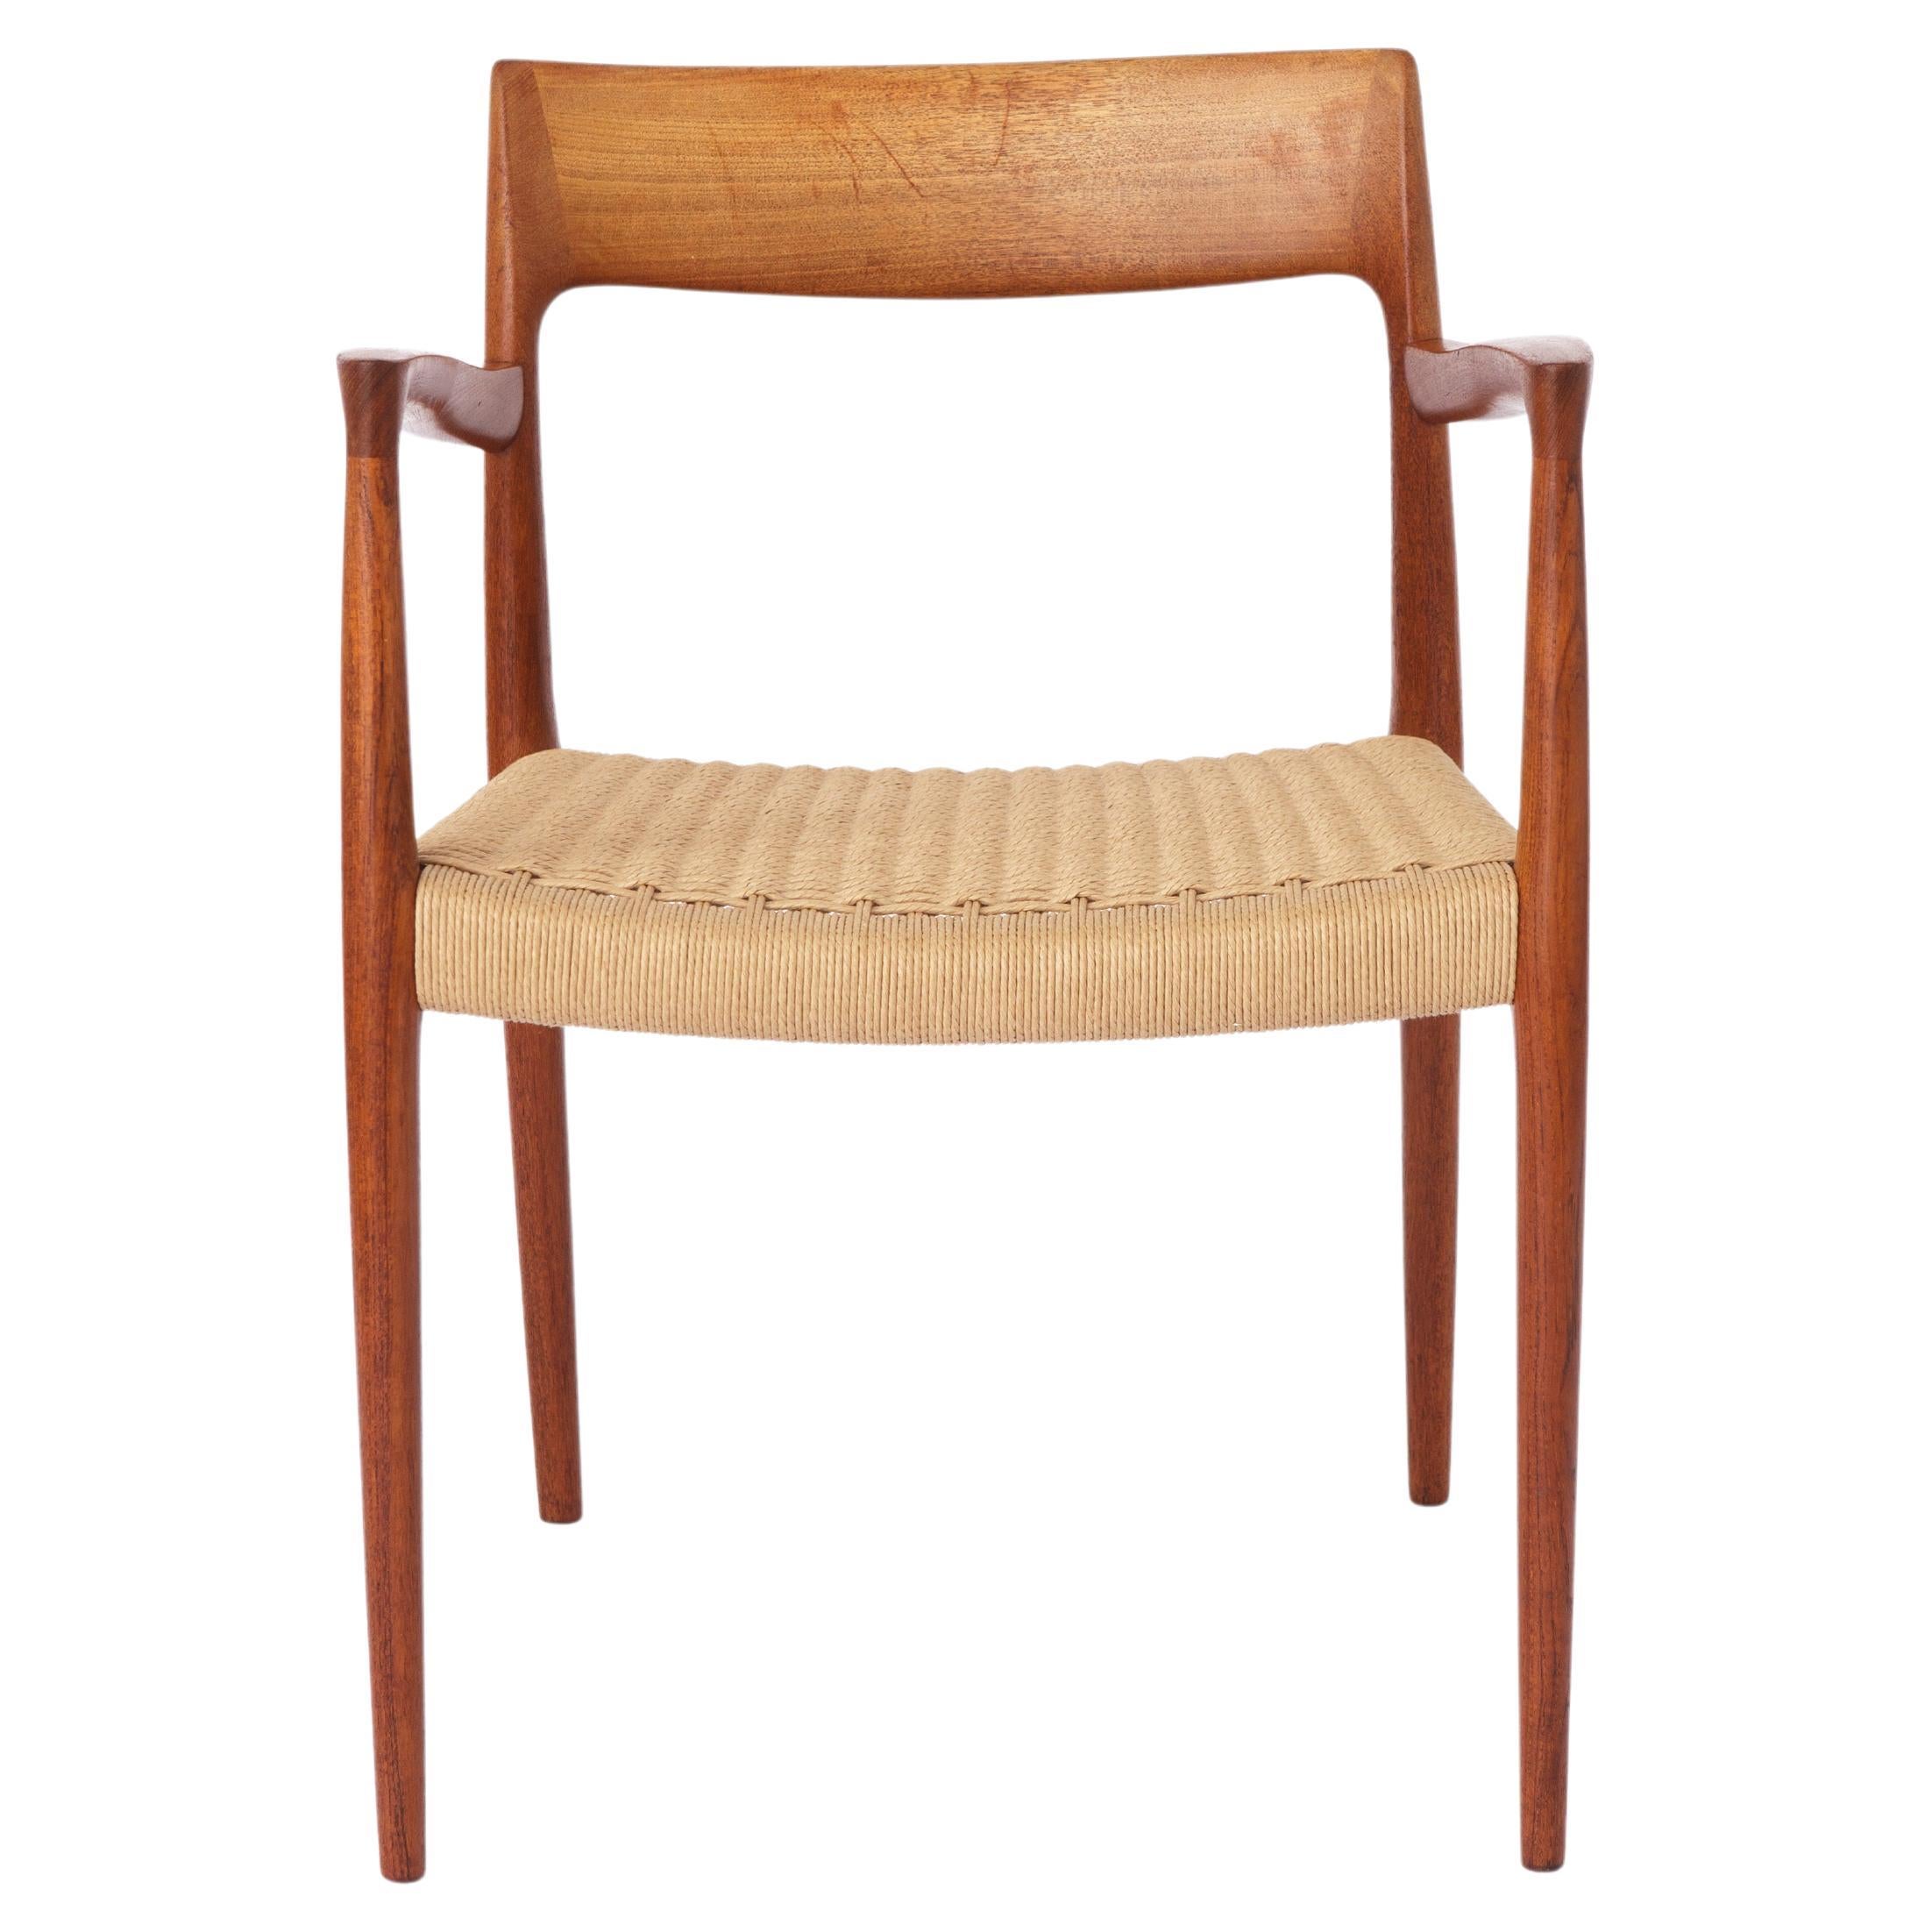 Niels Moller armchair, model 57, 1950s Vintage, paper cord seat, dining chair